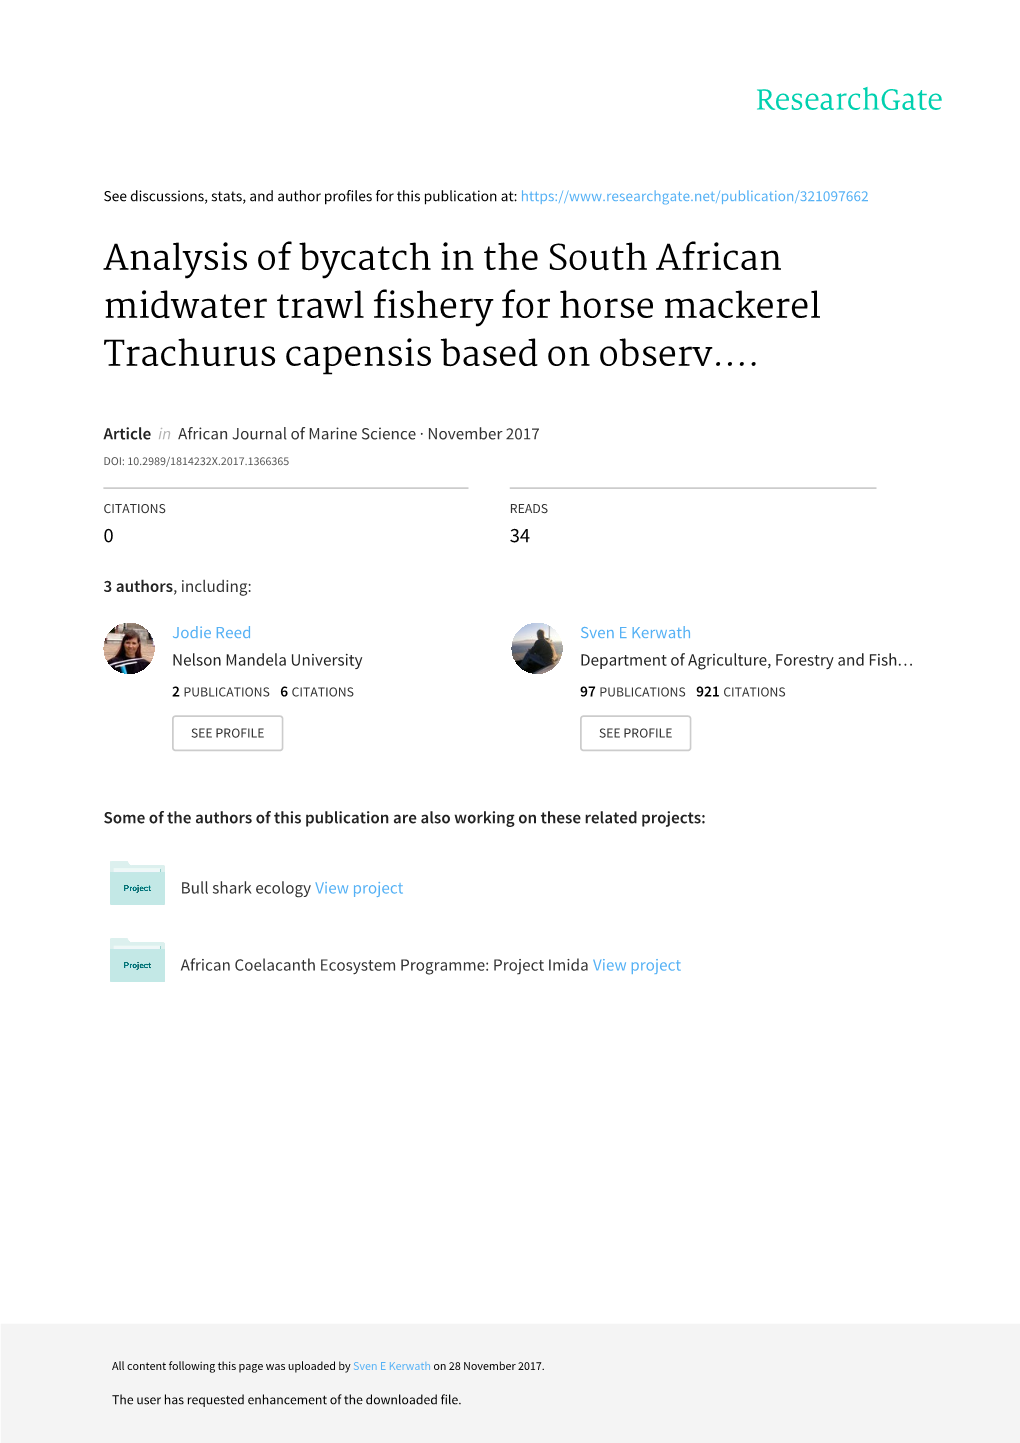 Analysis of Bycatch in the South African Midwater Trawl Fishery for Horse Mackerel Trachurus Capensis Based on Observ